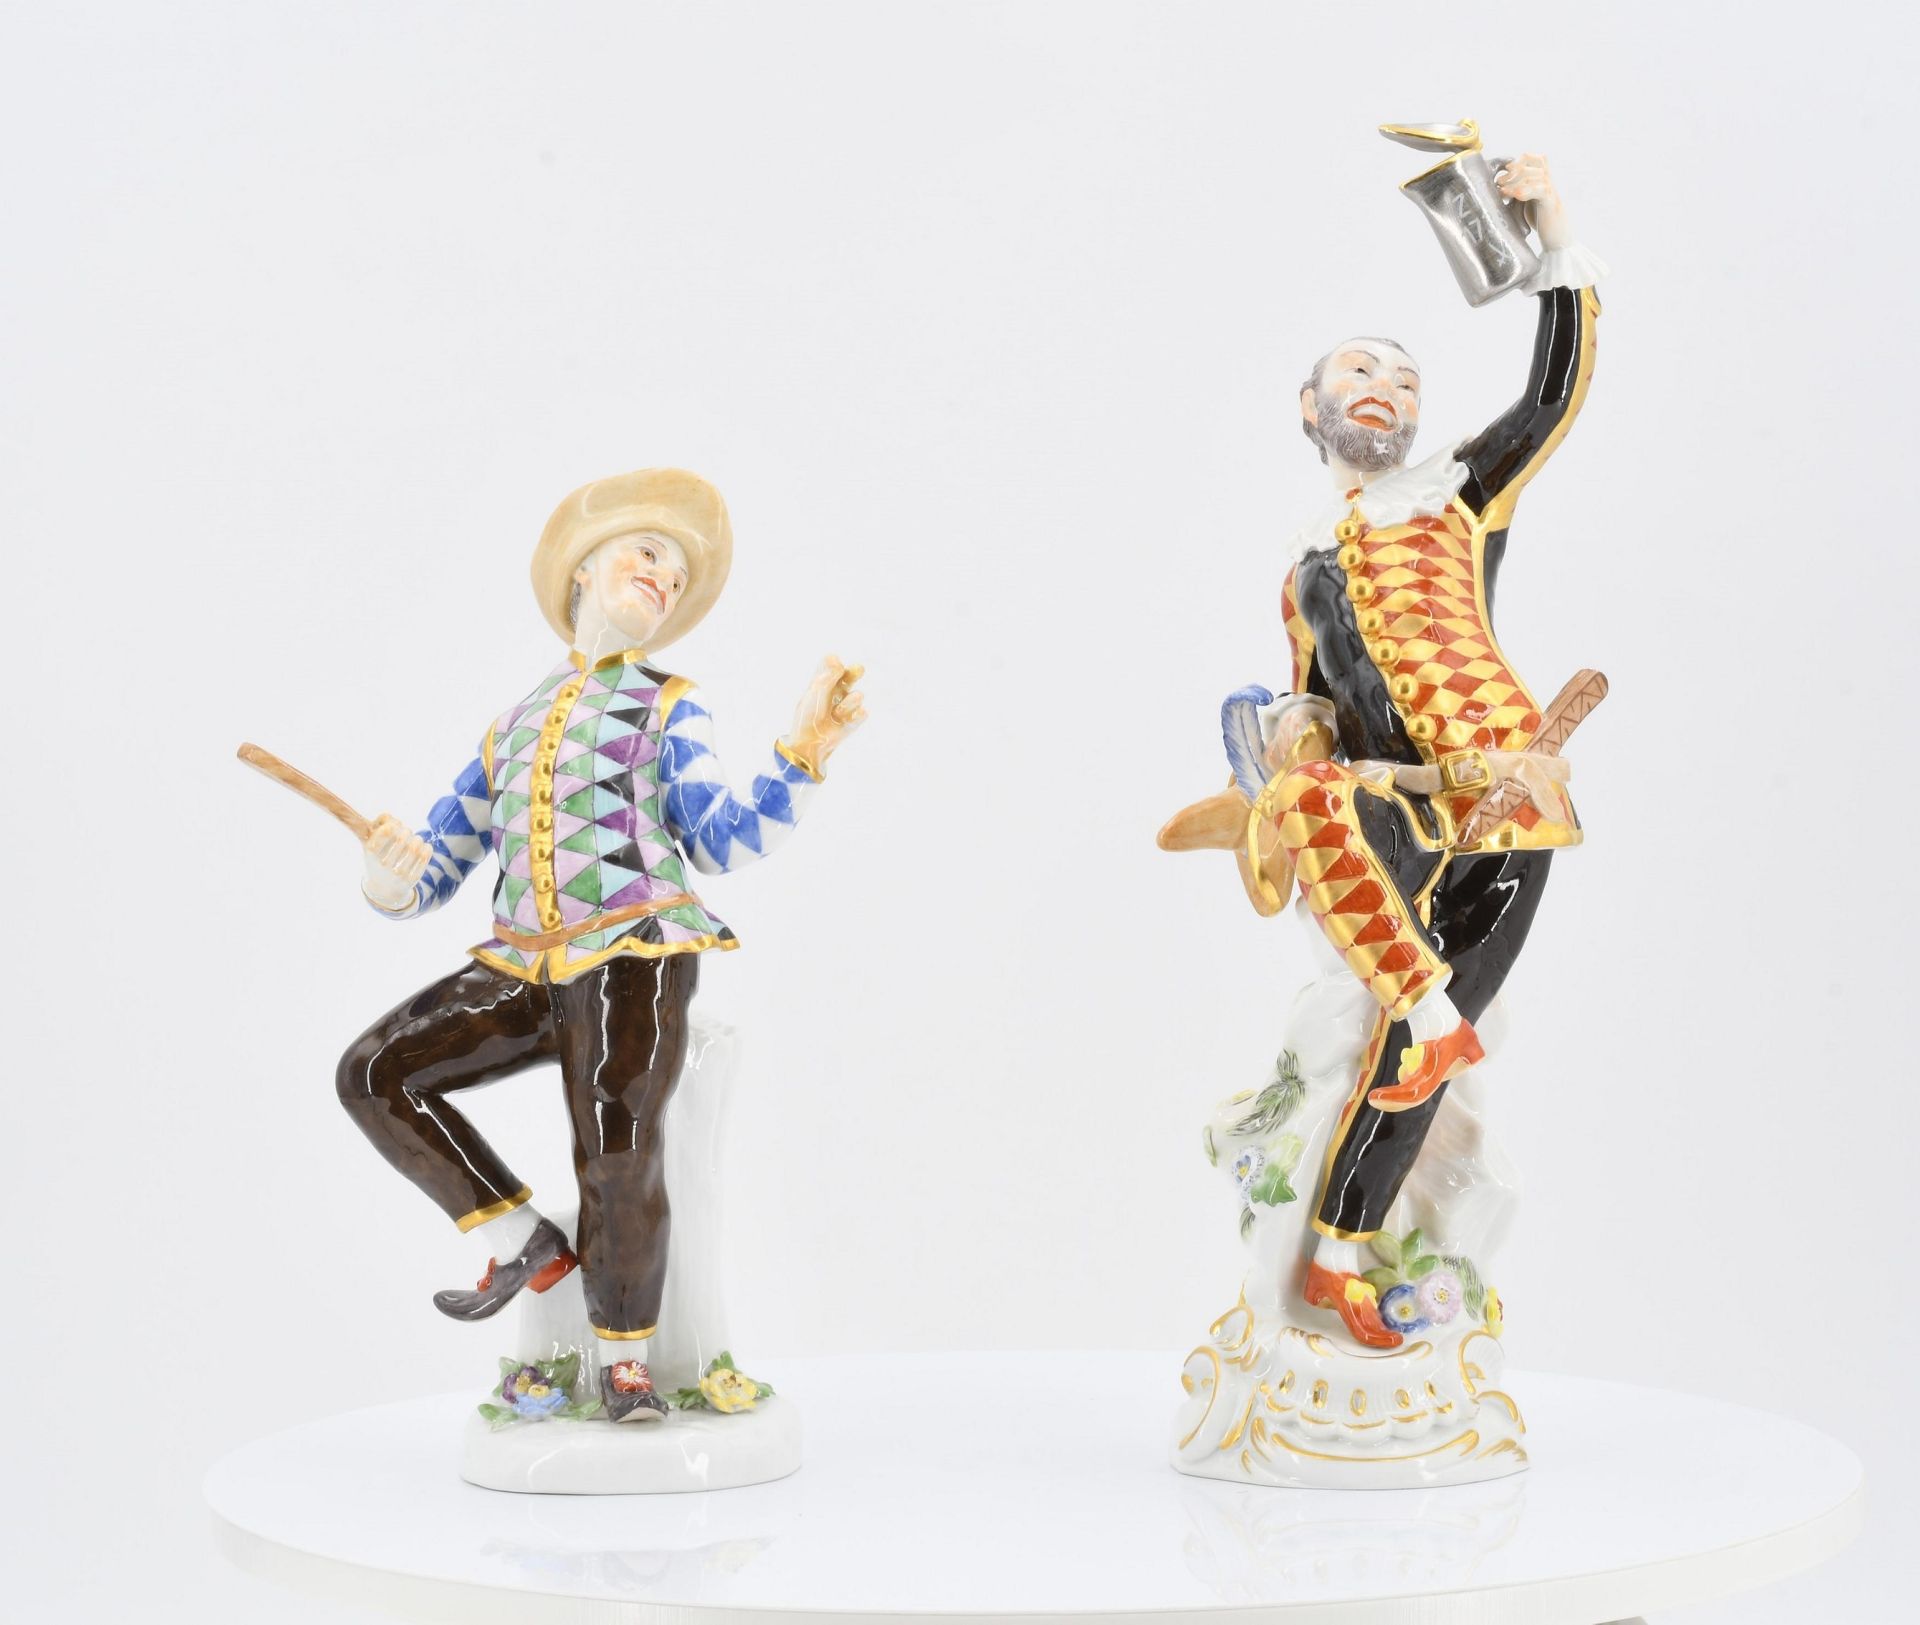 Harlequin with jug and Harlequin with slapstick from the Commedia dell'Arte - Image 2 of 6